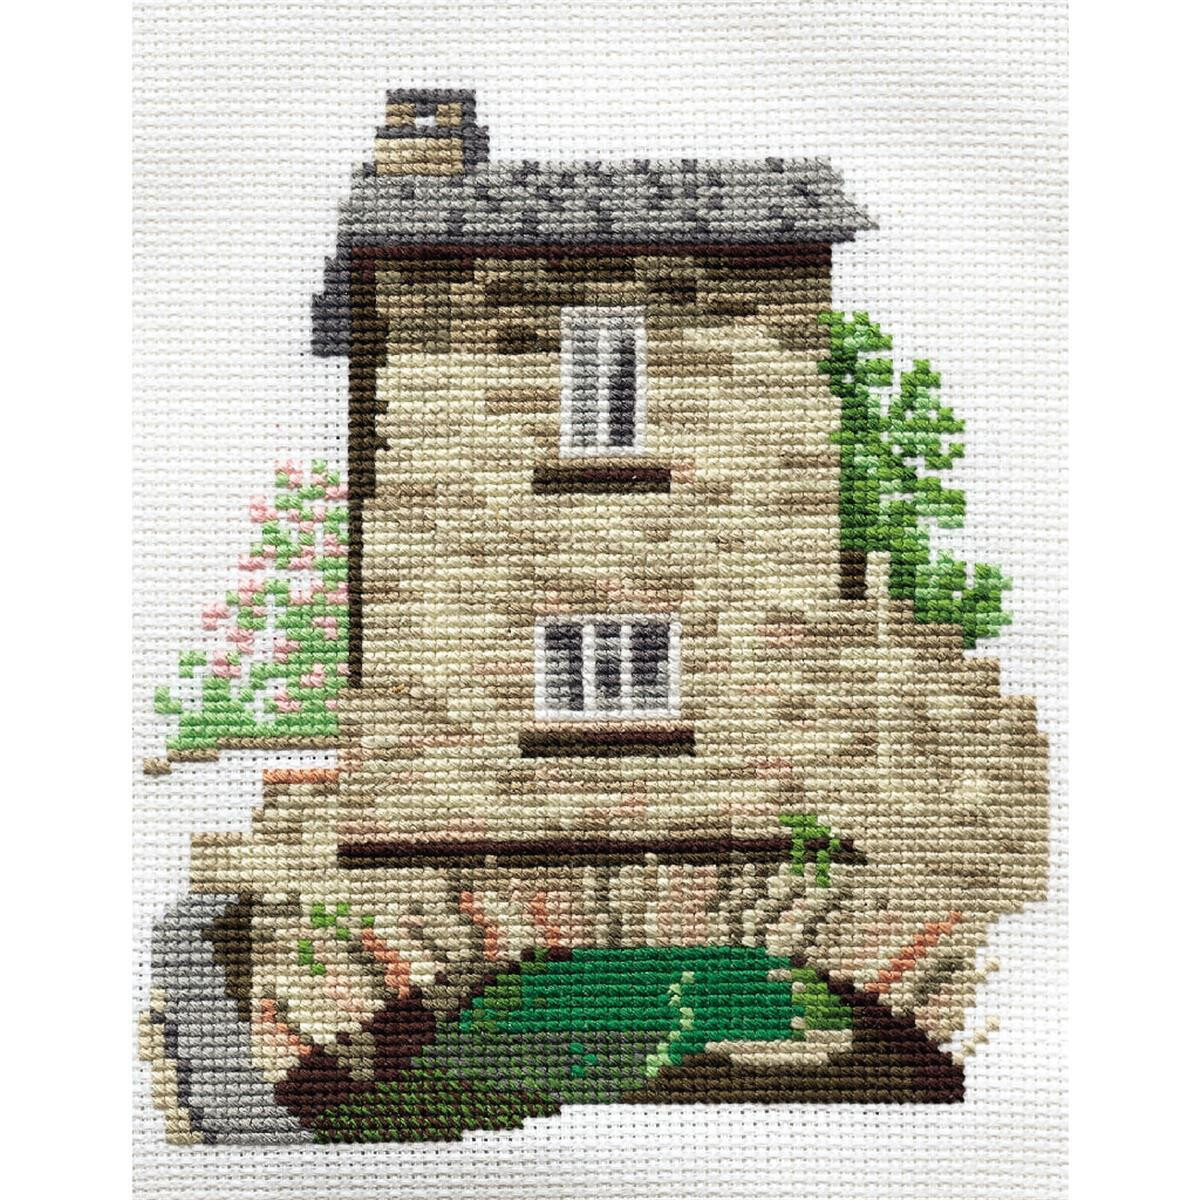 A cross stitch embroidery pack from Bothy Threads...